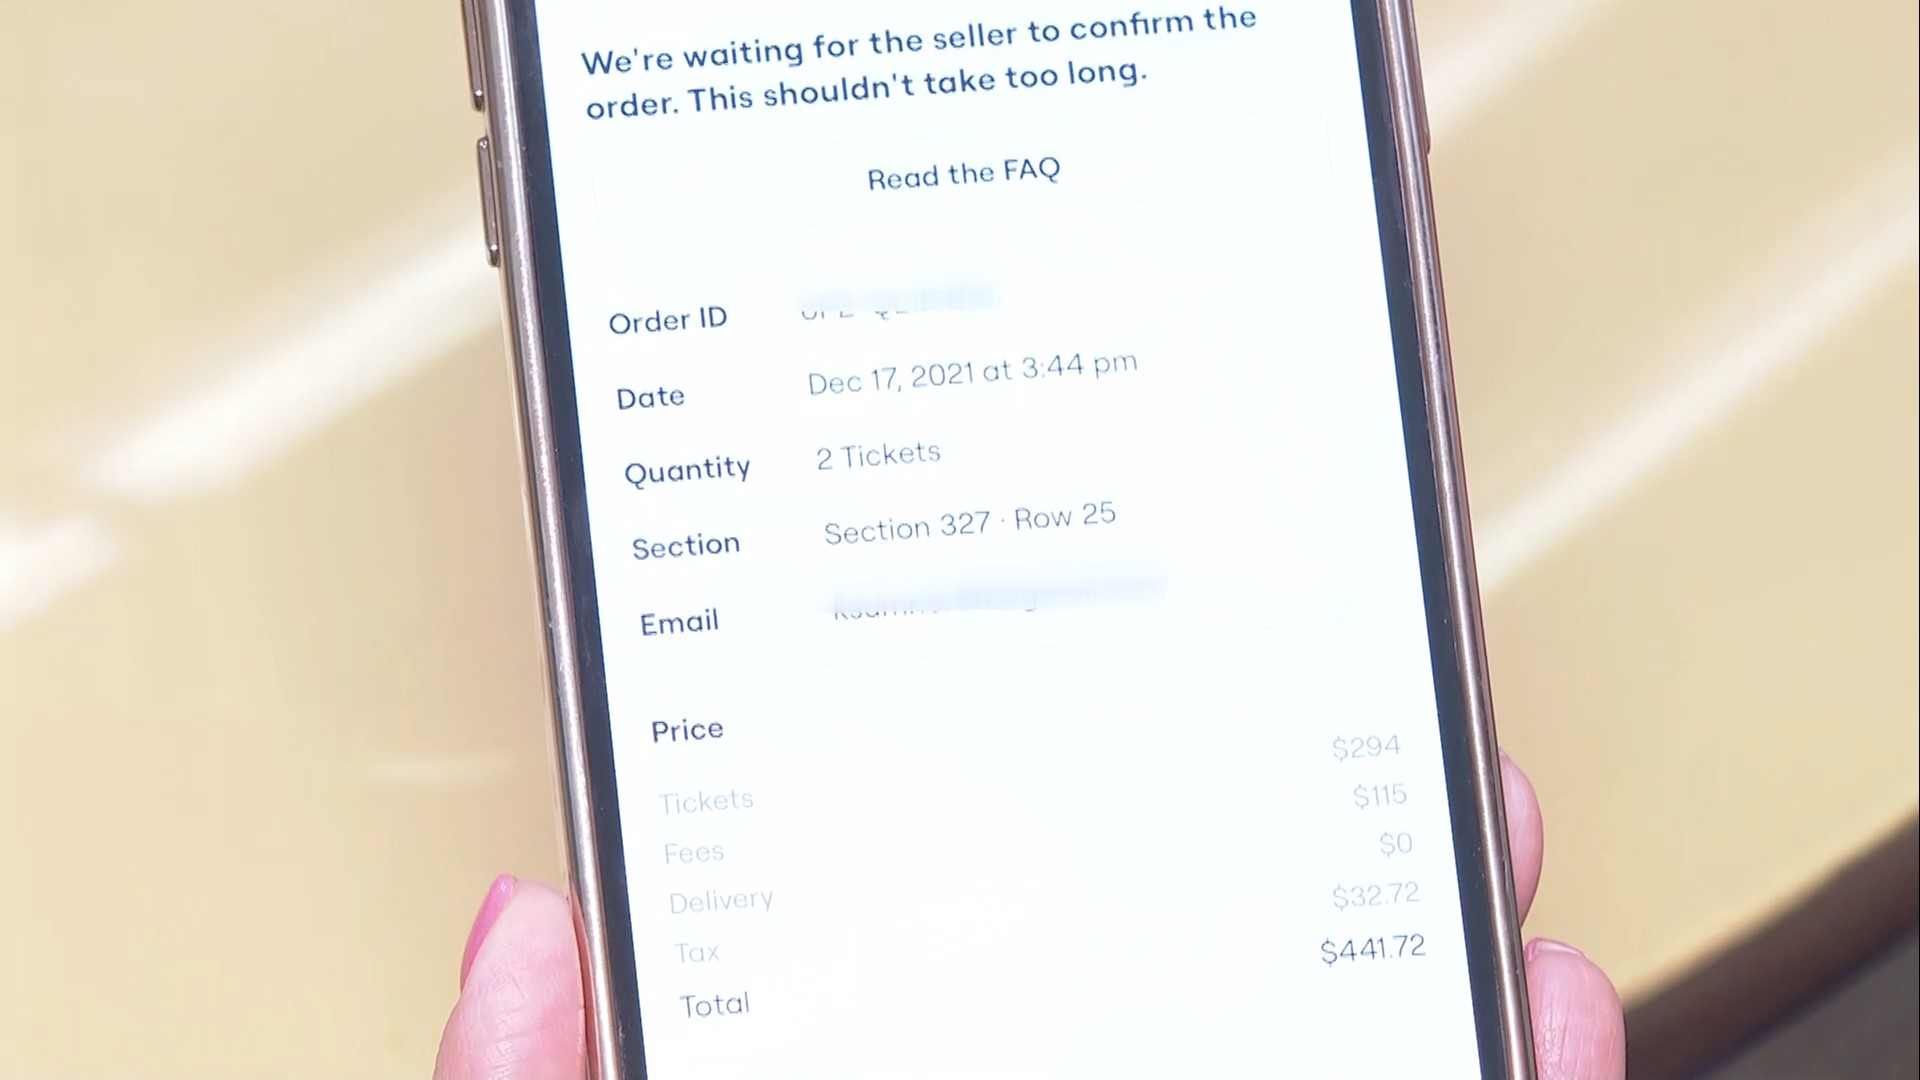 Katie Sumner bought tickets to the Georgia-Tennessee game on SeatGeek months in advance. The site took her money, but the seller never released tickets, she says.